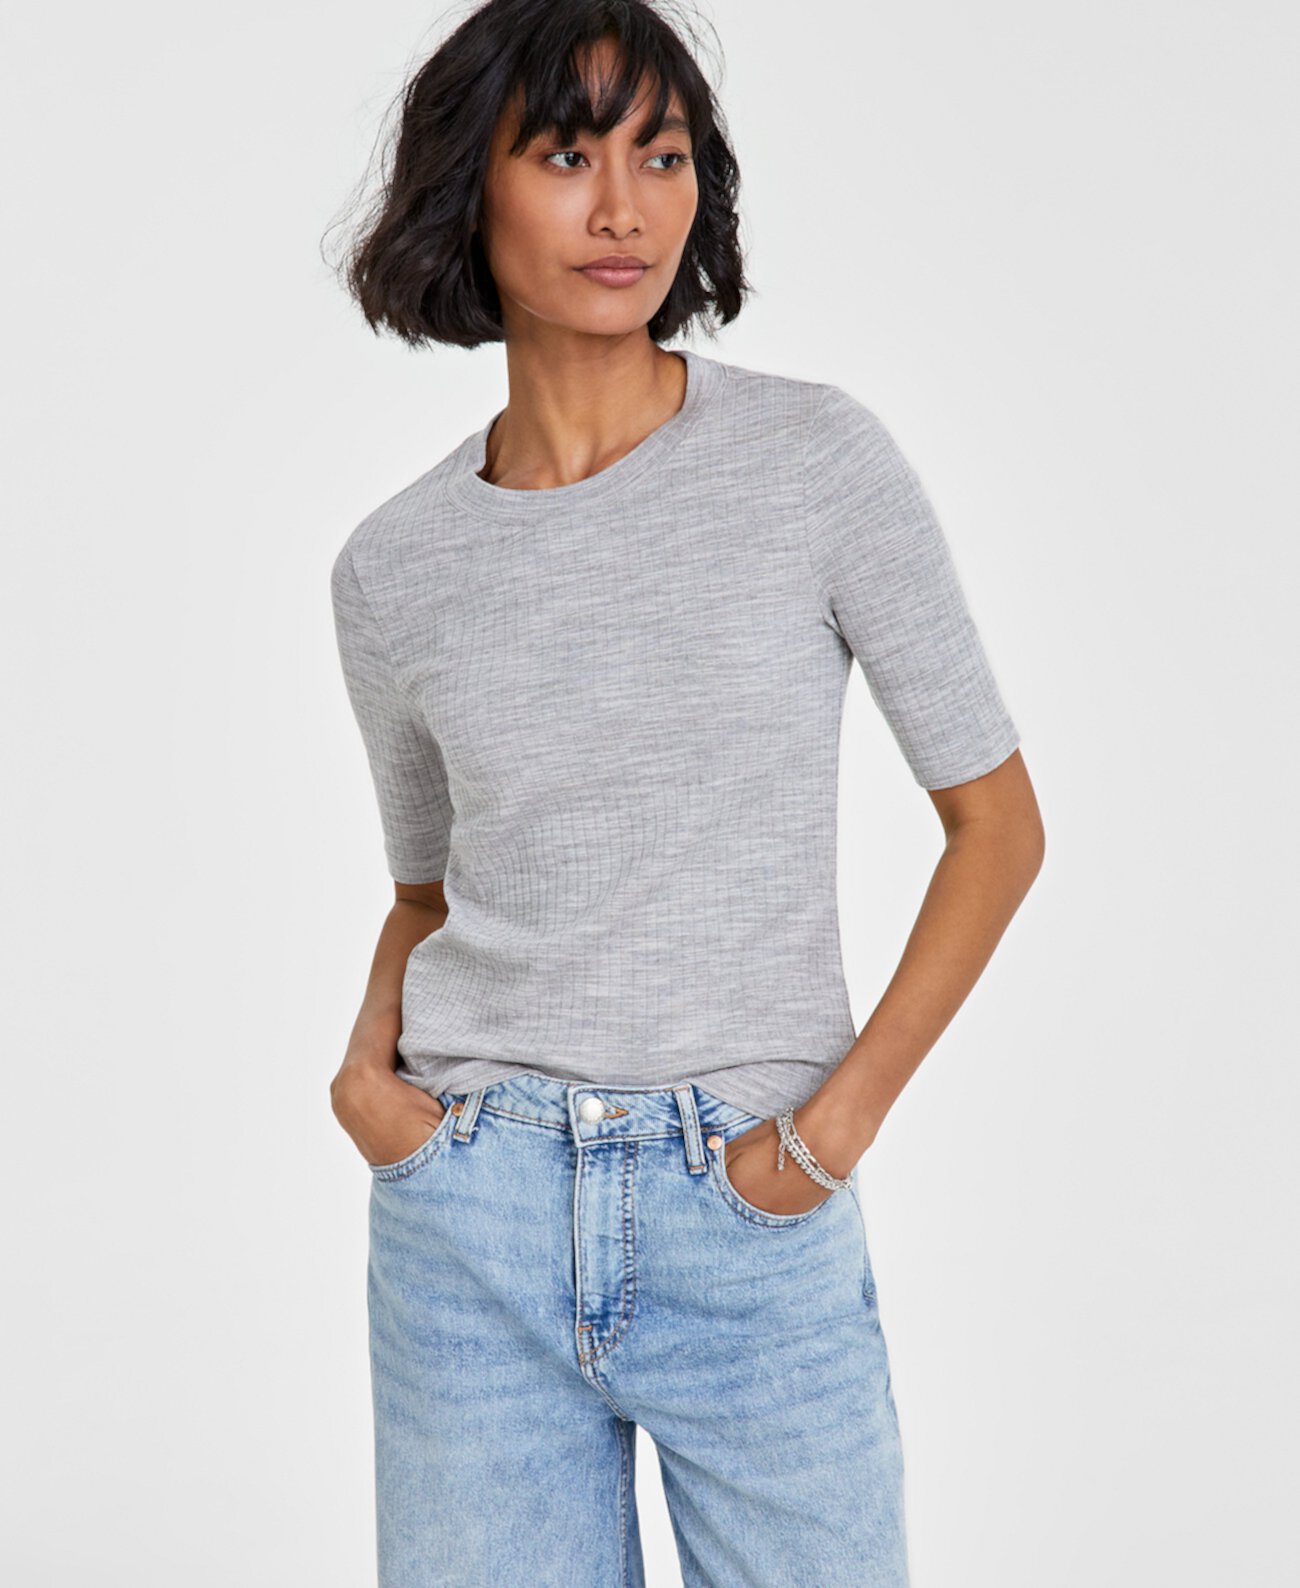 Women's Spacedye Rib-Knit Top, Created for Macy's On 34th